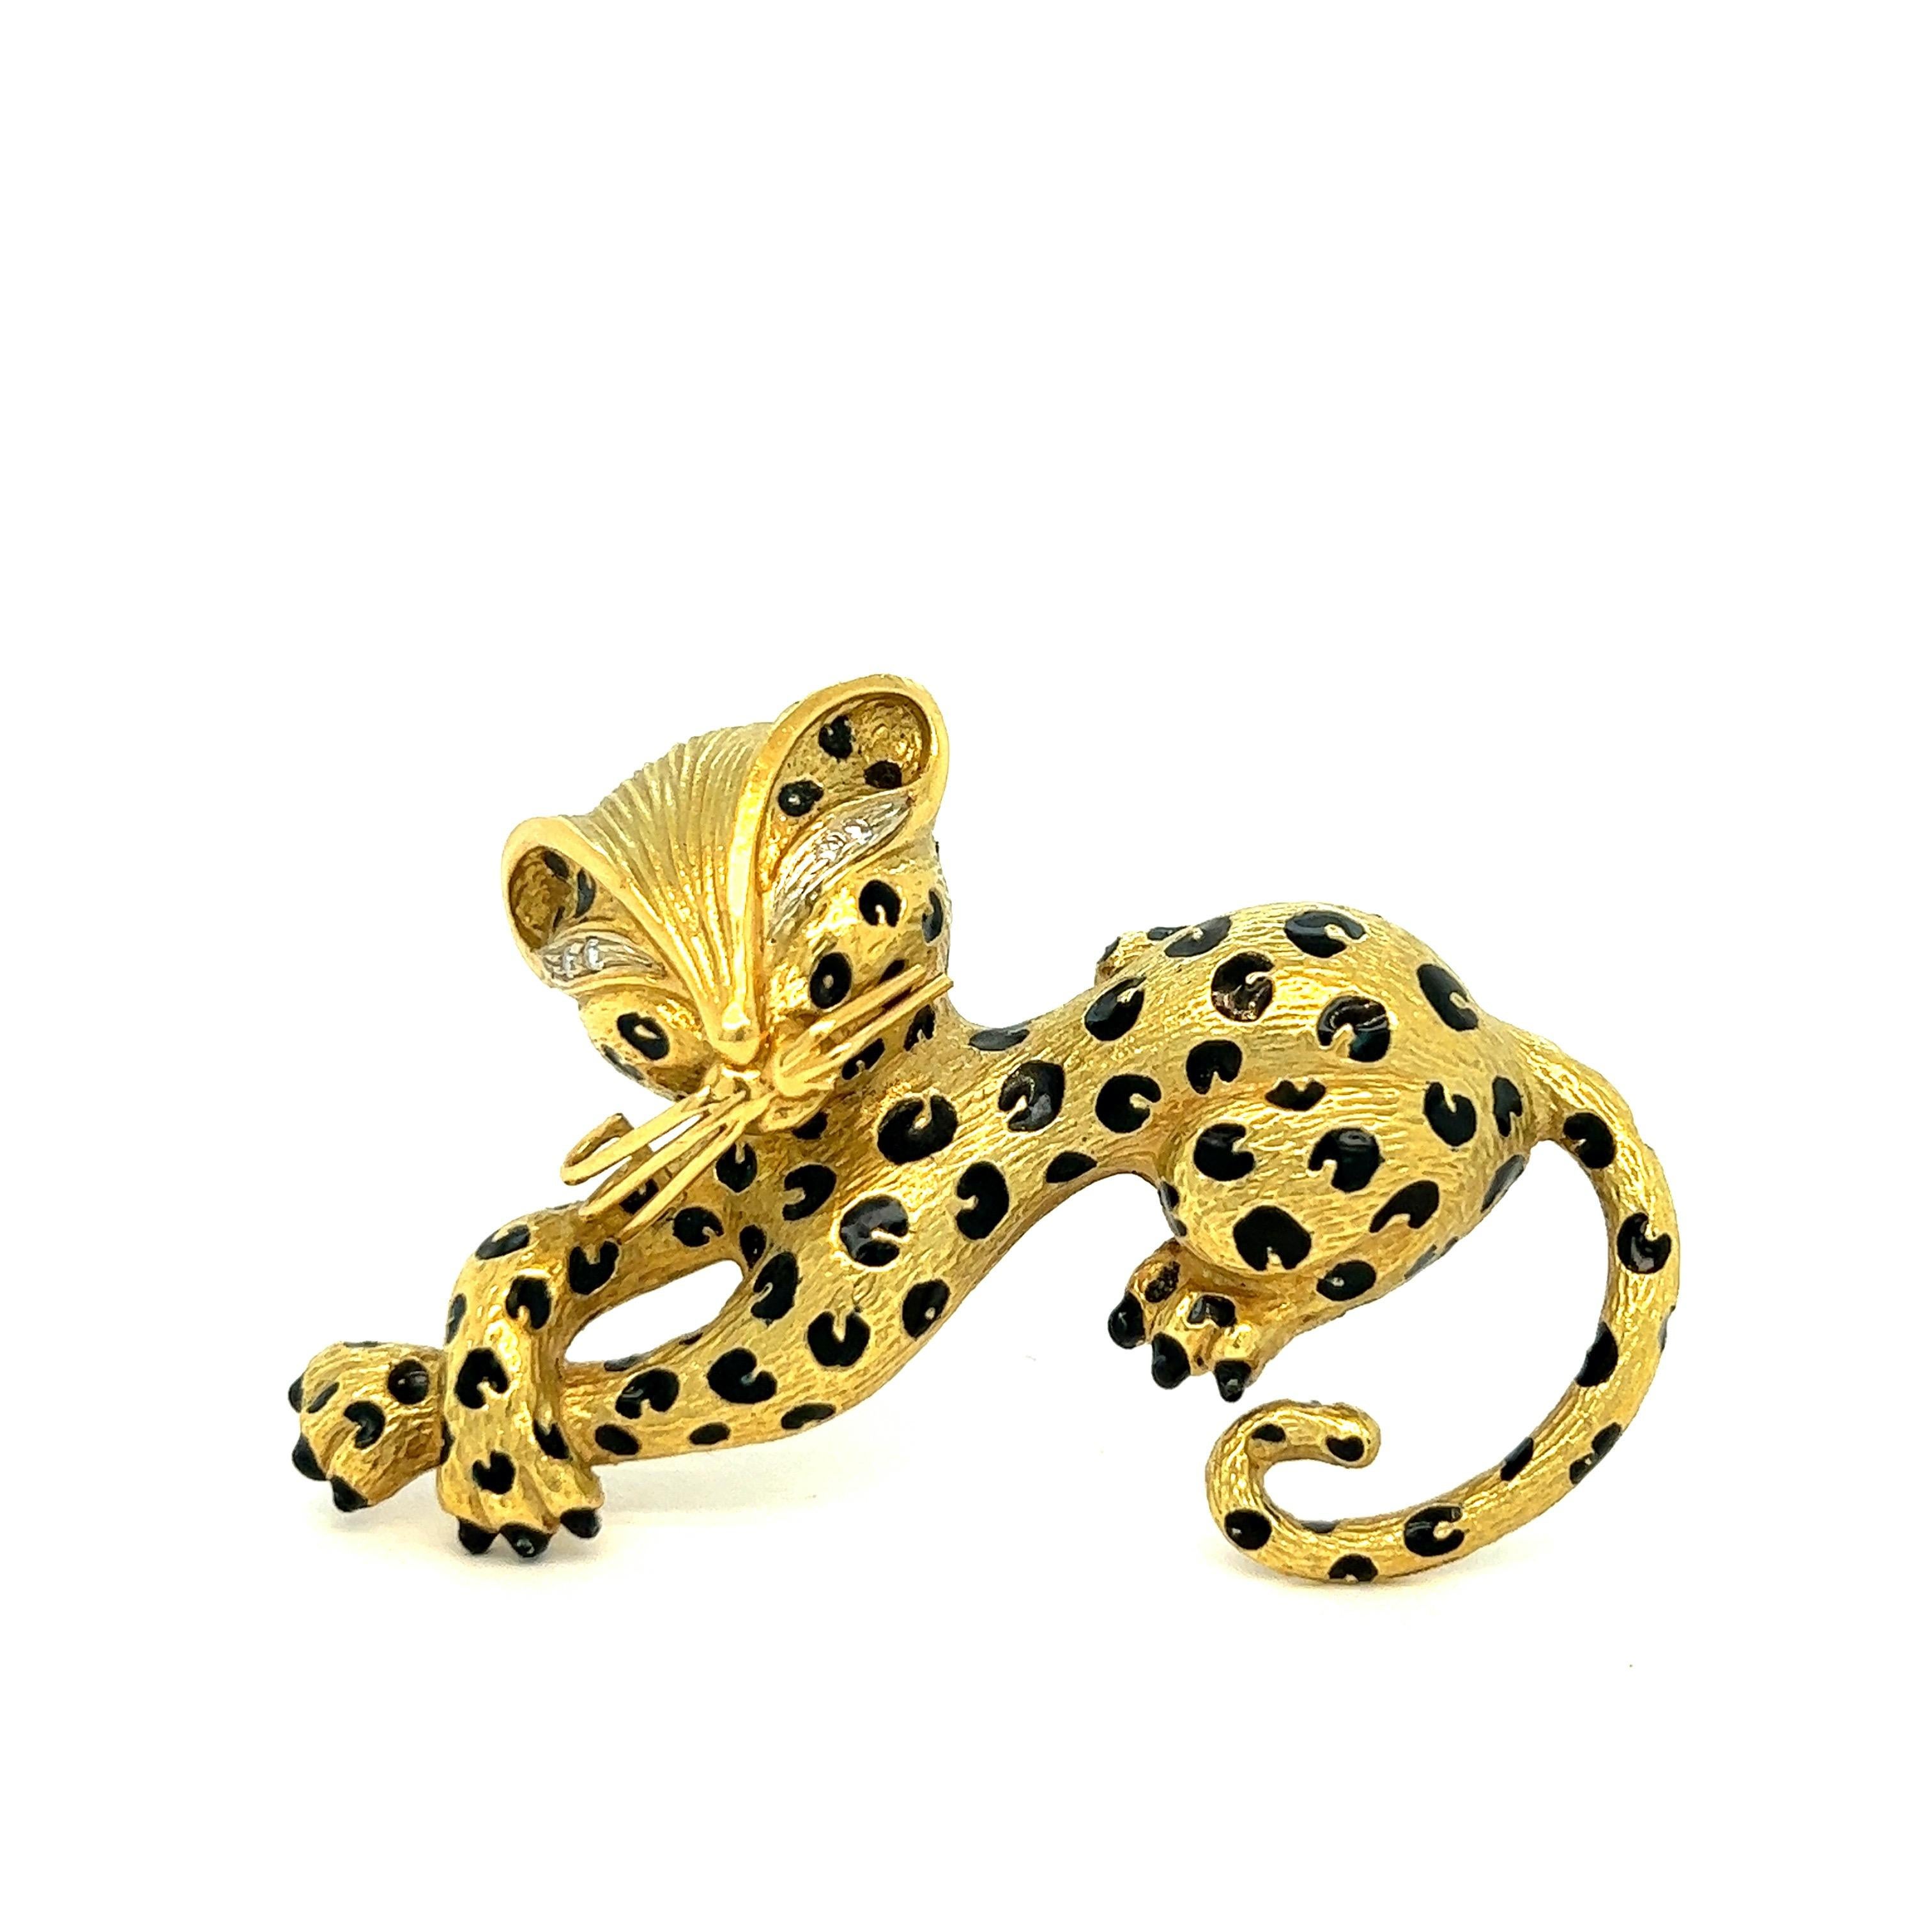 Cheetah Black Enamel Gold Brooch In Excellent Condition For Sale In New York, NY